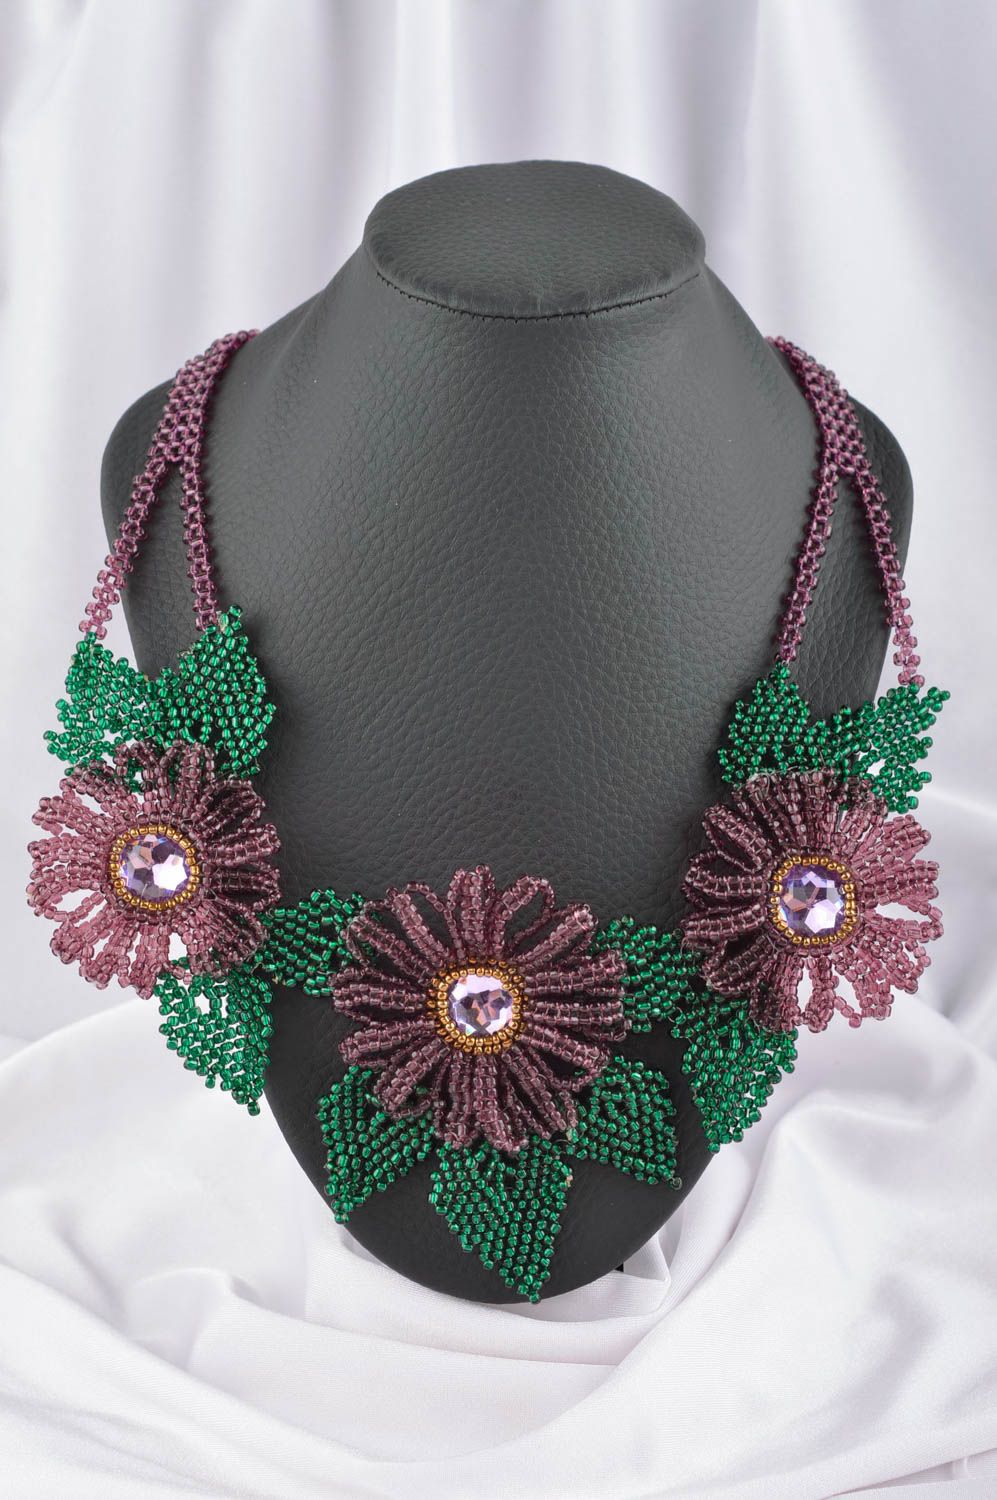 Stylish handmade flower necklace design beaded necklace woven bead necklace photo 1